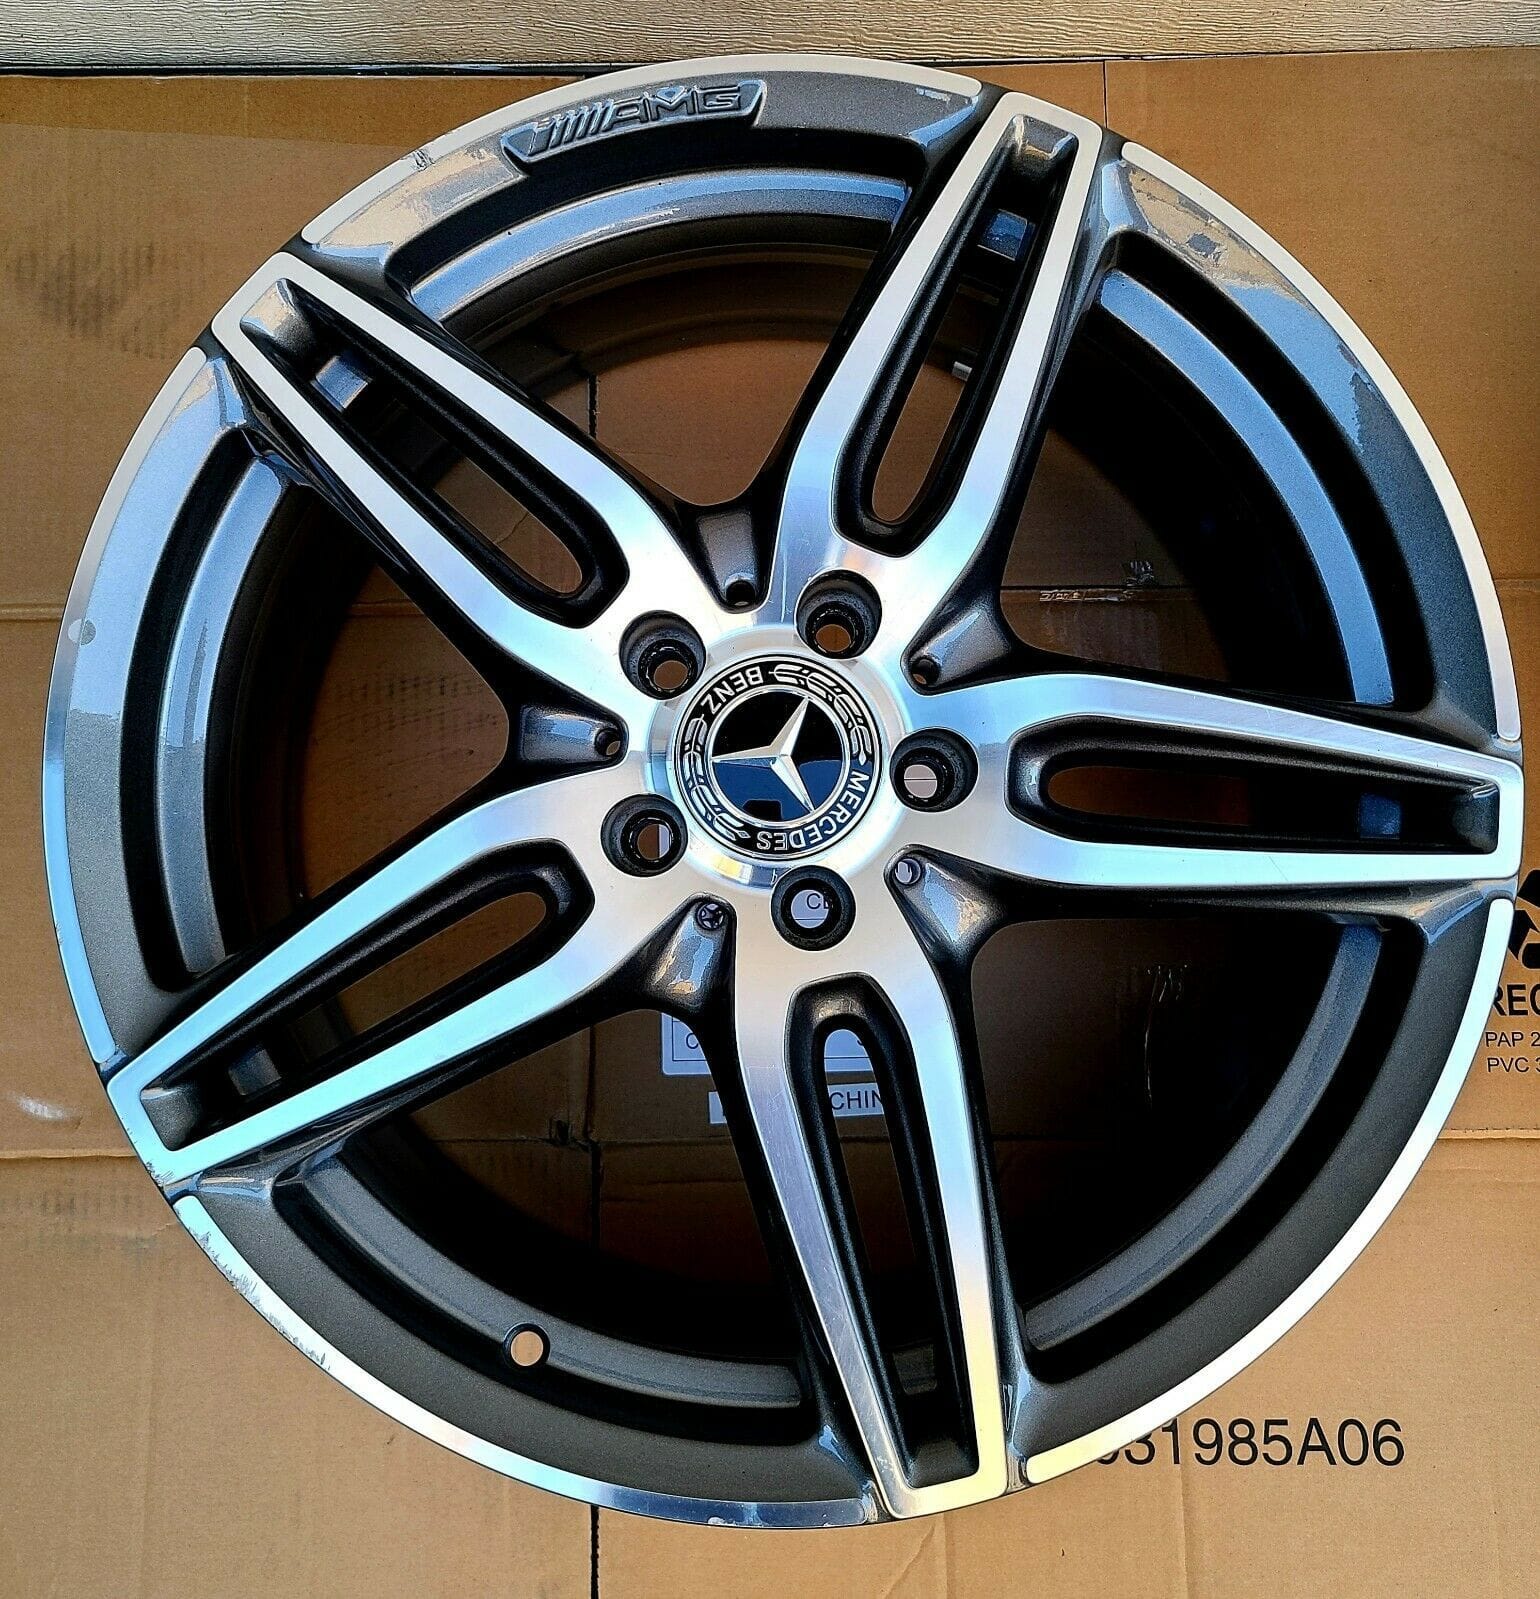 Wheels and Tires/Axles - 4 Original 19" AMG Mercedes-Benz Alloy Wheels 8Jx19 ET43 A2134012000 E Class W213 - Used - 2017 to 2018 Mercedes-Benz E400 - 2017 to 2019 Mercedes-Benz E300 - 2017 to 2020 Mercedes-Benz E43 AMG - 2019 to 2020 Mercedes-Benz E450 - 2019 to 2020 Mercedes-Benz E53 AMG - 2018 to 2020 Mercedes-Benz E63 AMG S - 2018 to 2020 Mercedes-Benz E63 AMG - 2020 Mercedes-Benz E350 - Glendale, NY 11385, United States